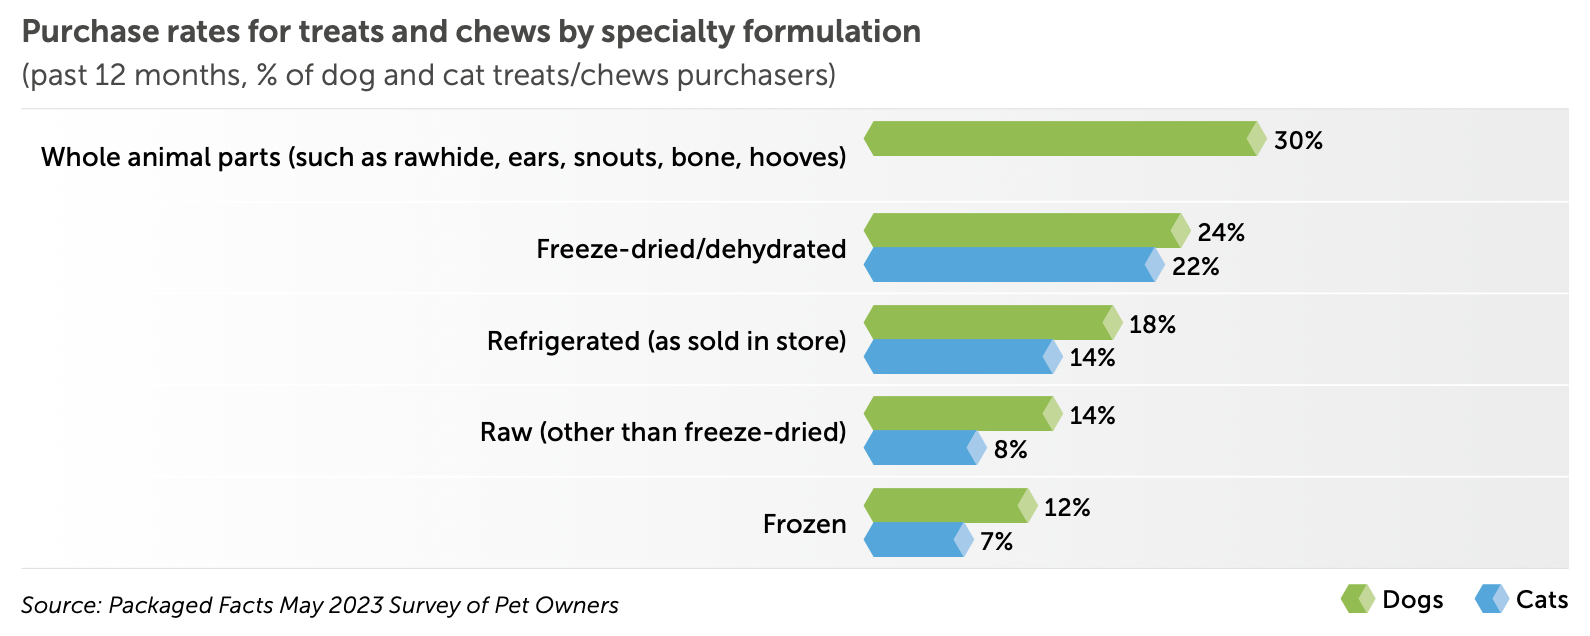 Purchase rates for treats and chews by specialty formulation